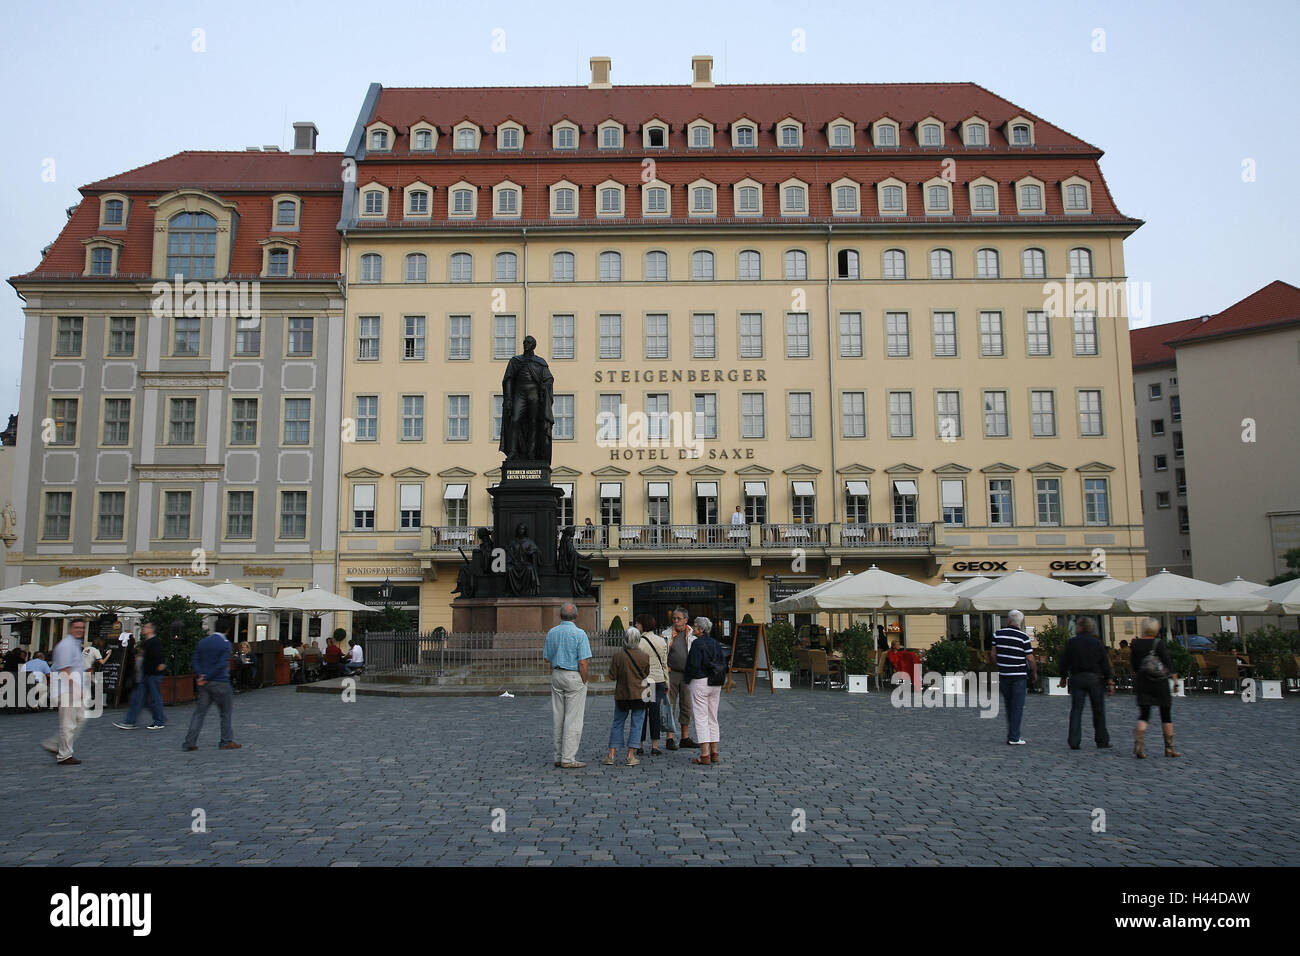 Germany, Saxony, Dresden, Old Town, new market, Steigenberger hotel,  forecourt, person Stock Photo - Alamy